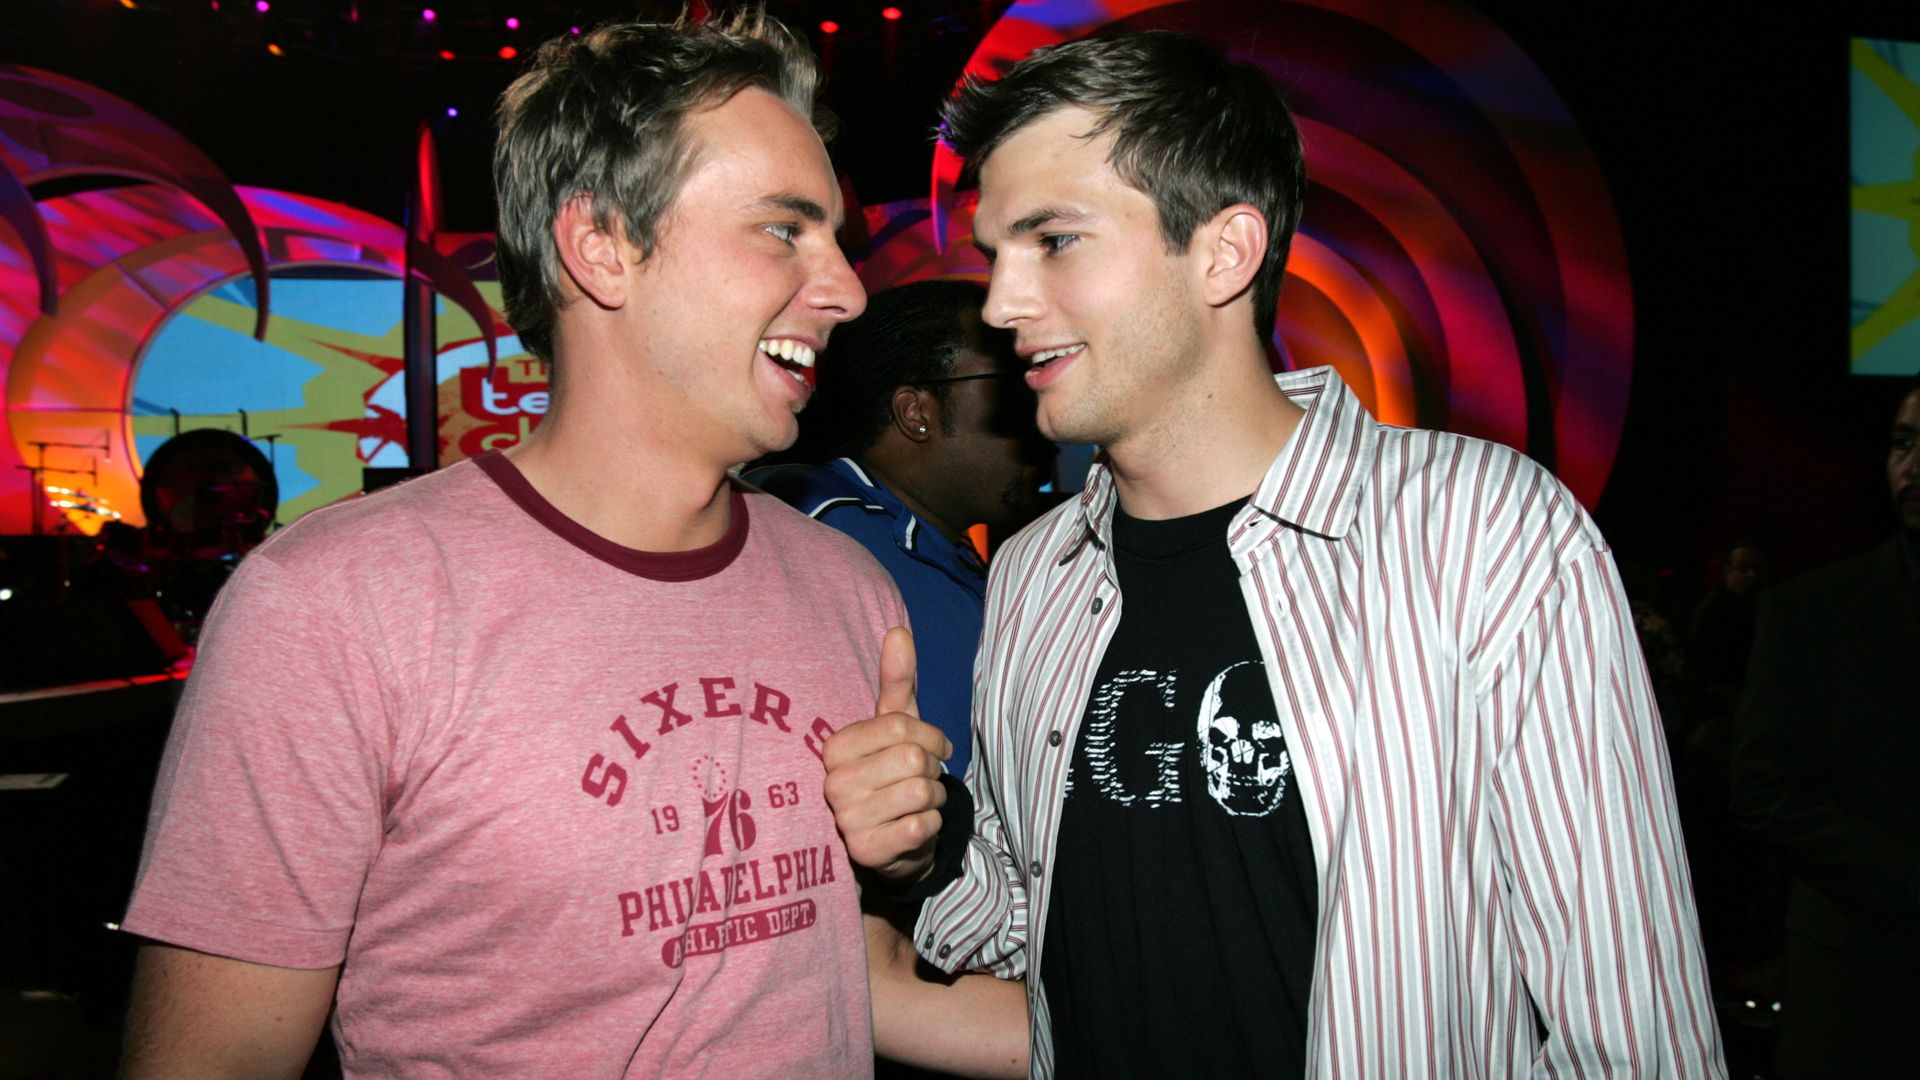 Dax and Ashton chatting backstage at a TV event in 2004